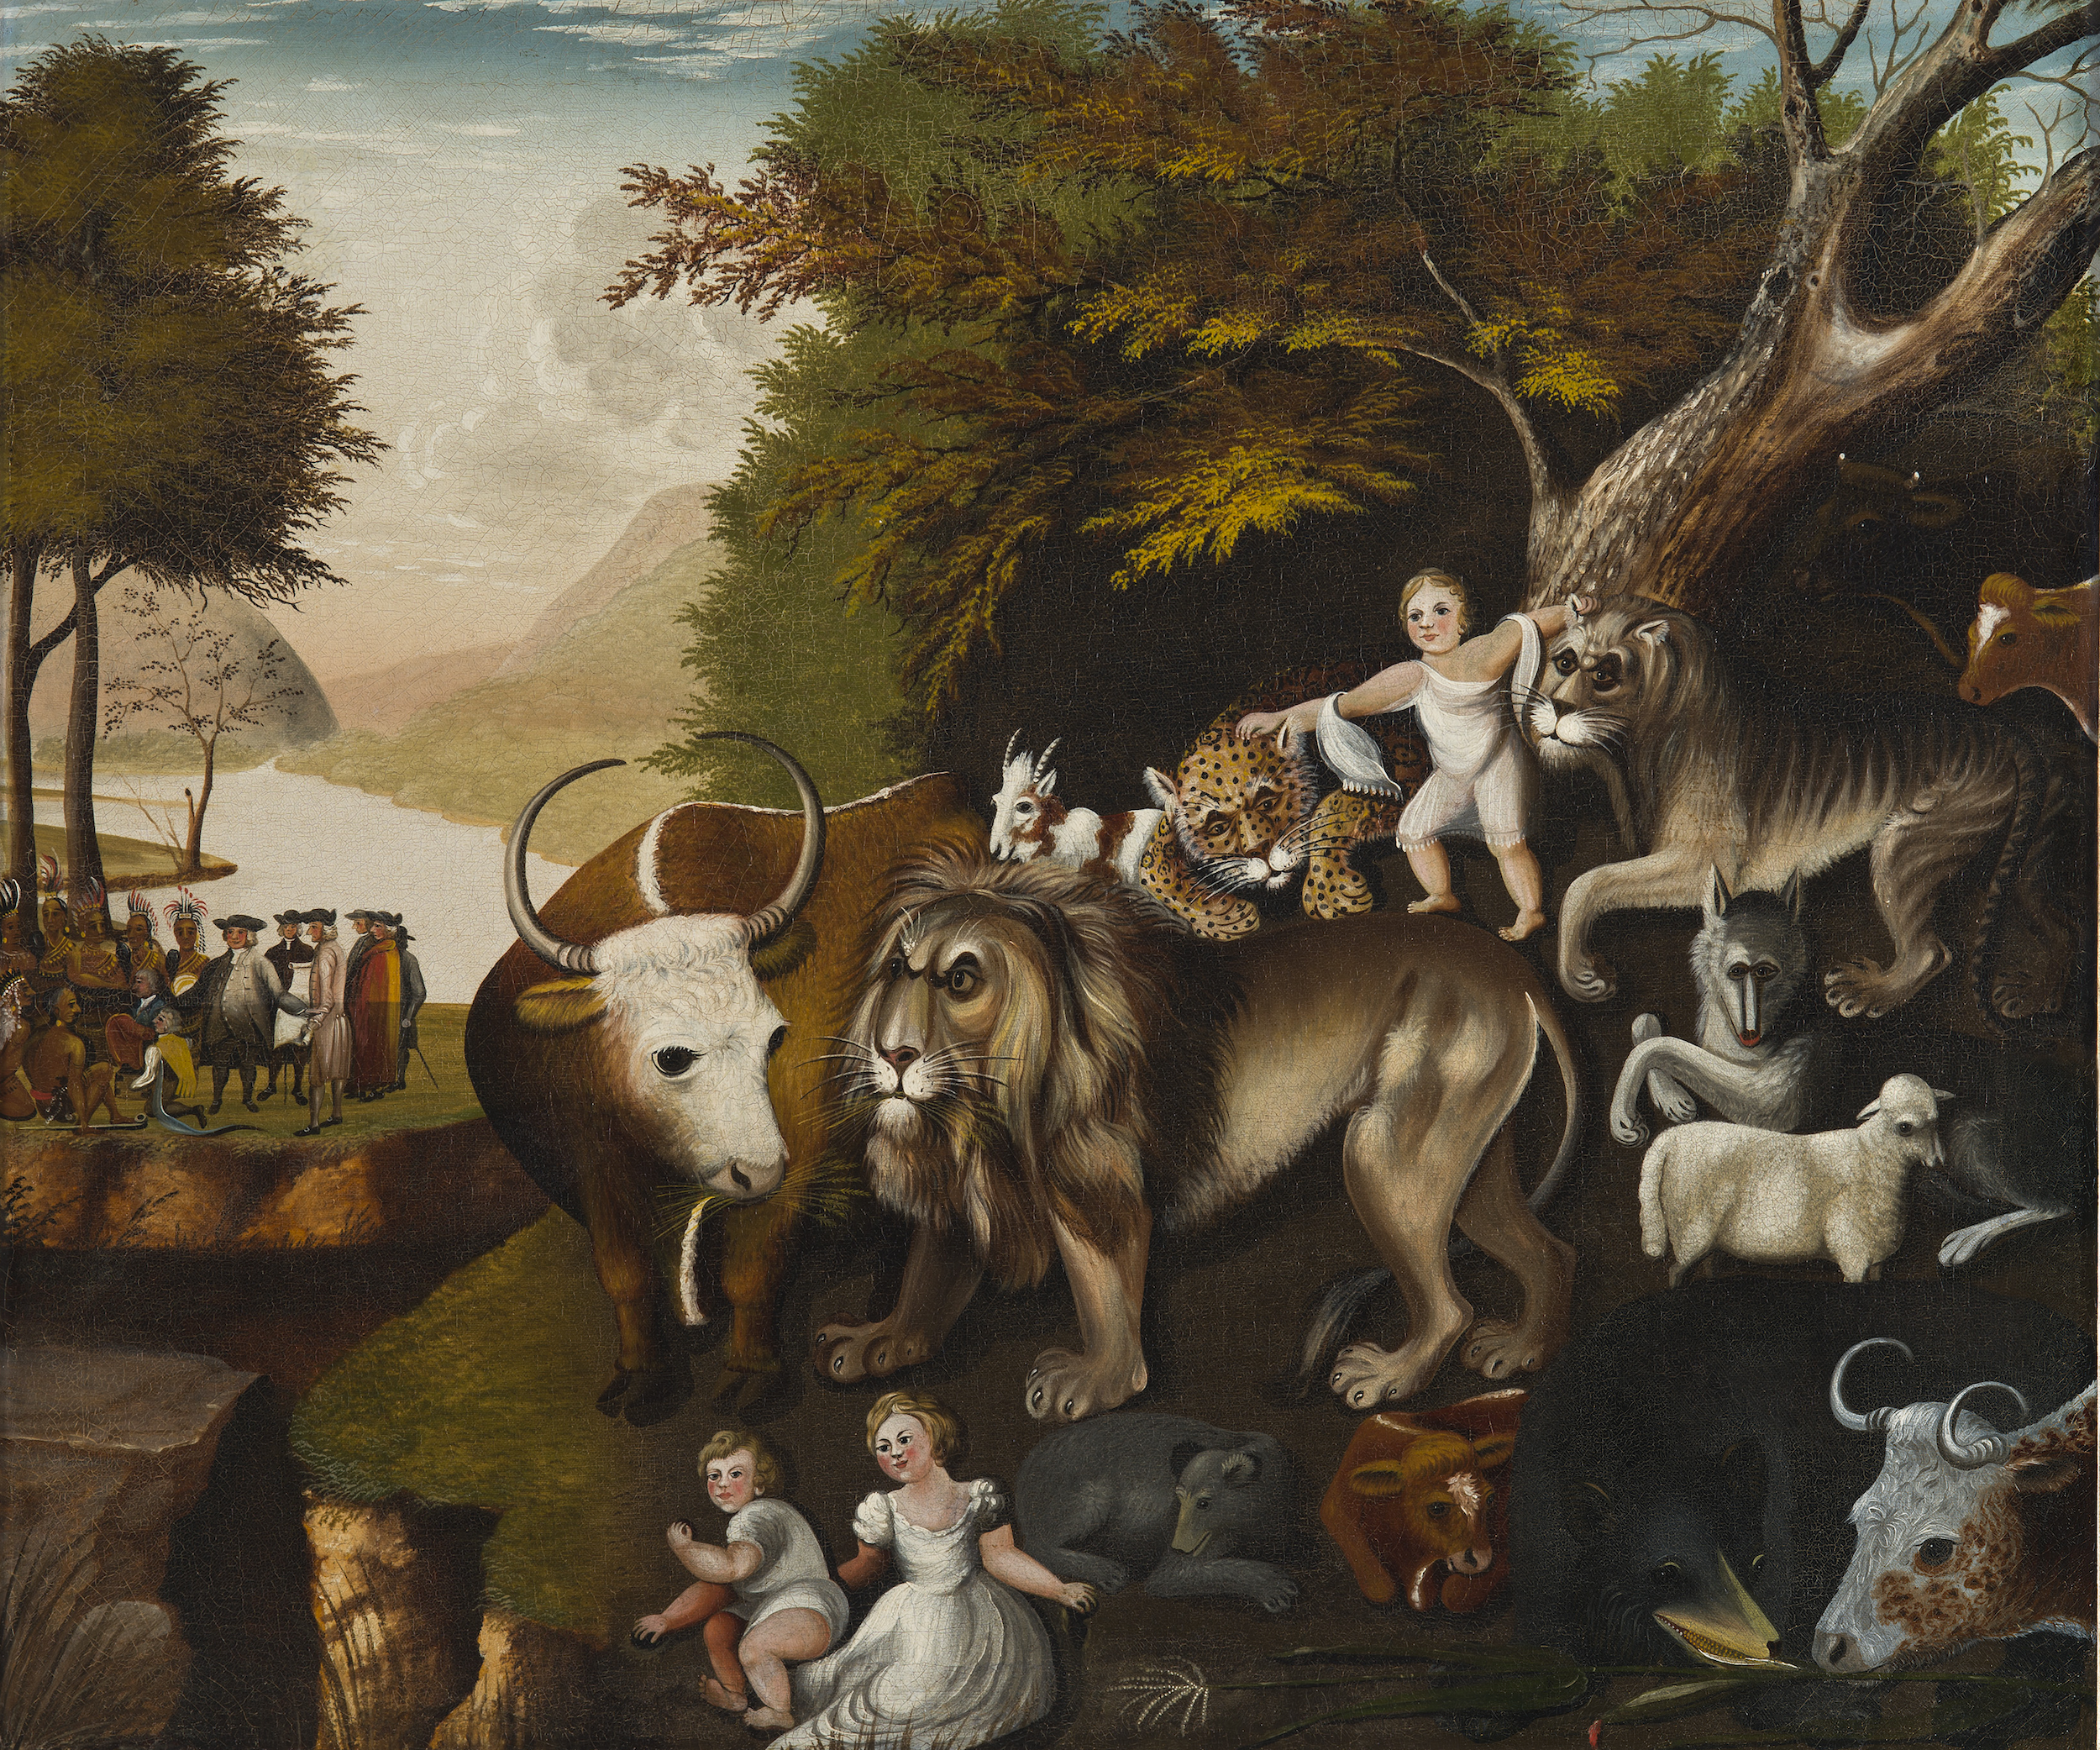 The Peaceable Kingdom by Edward Hicks - 1833 private collection